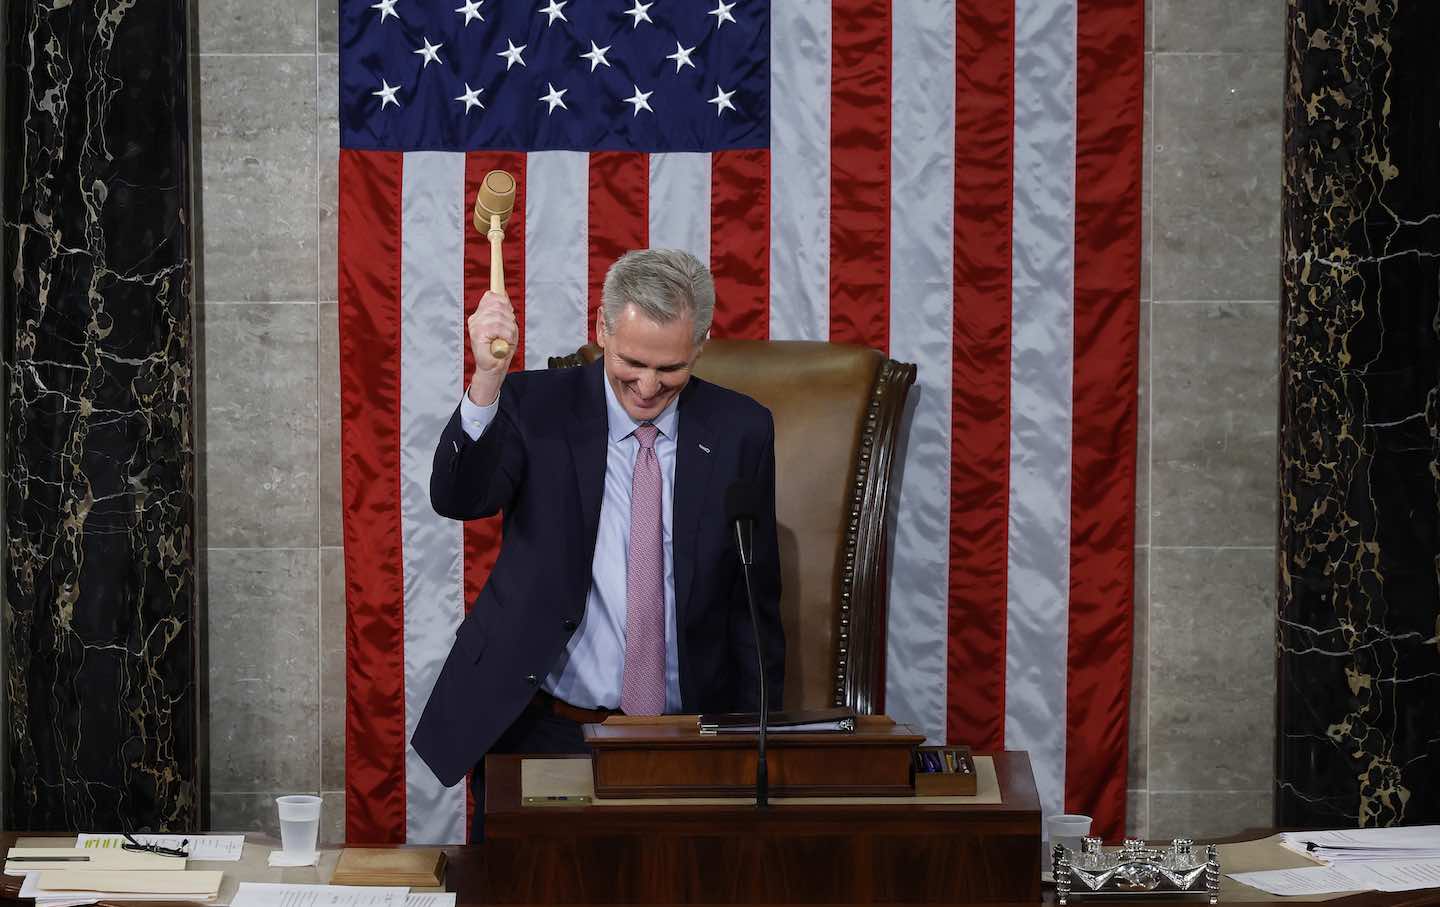 US Speaker of the House Kevin McCarthy (R-Calif.) hits the gavel after being elected Speaker in the House Chamber at the US Capitol on January 7, 2023.